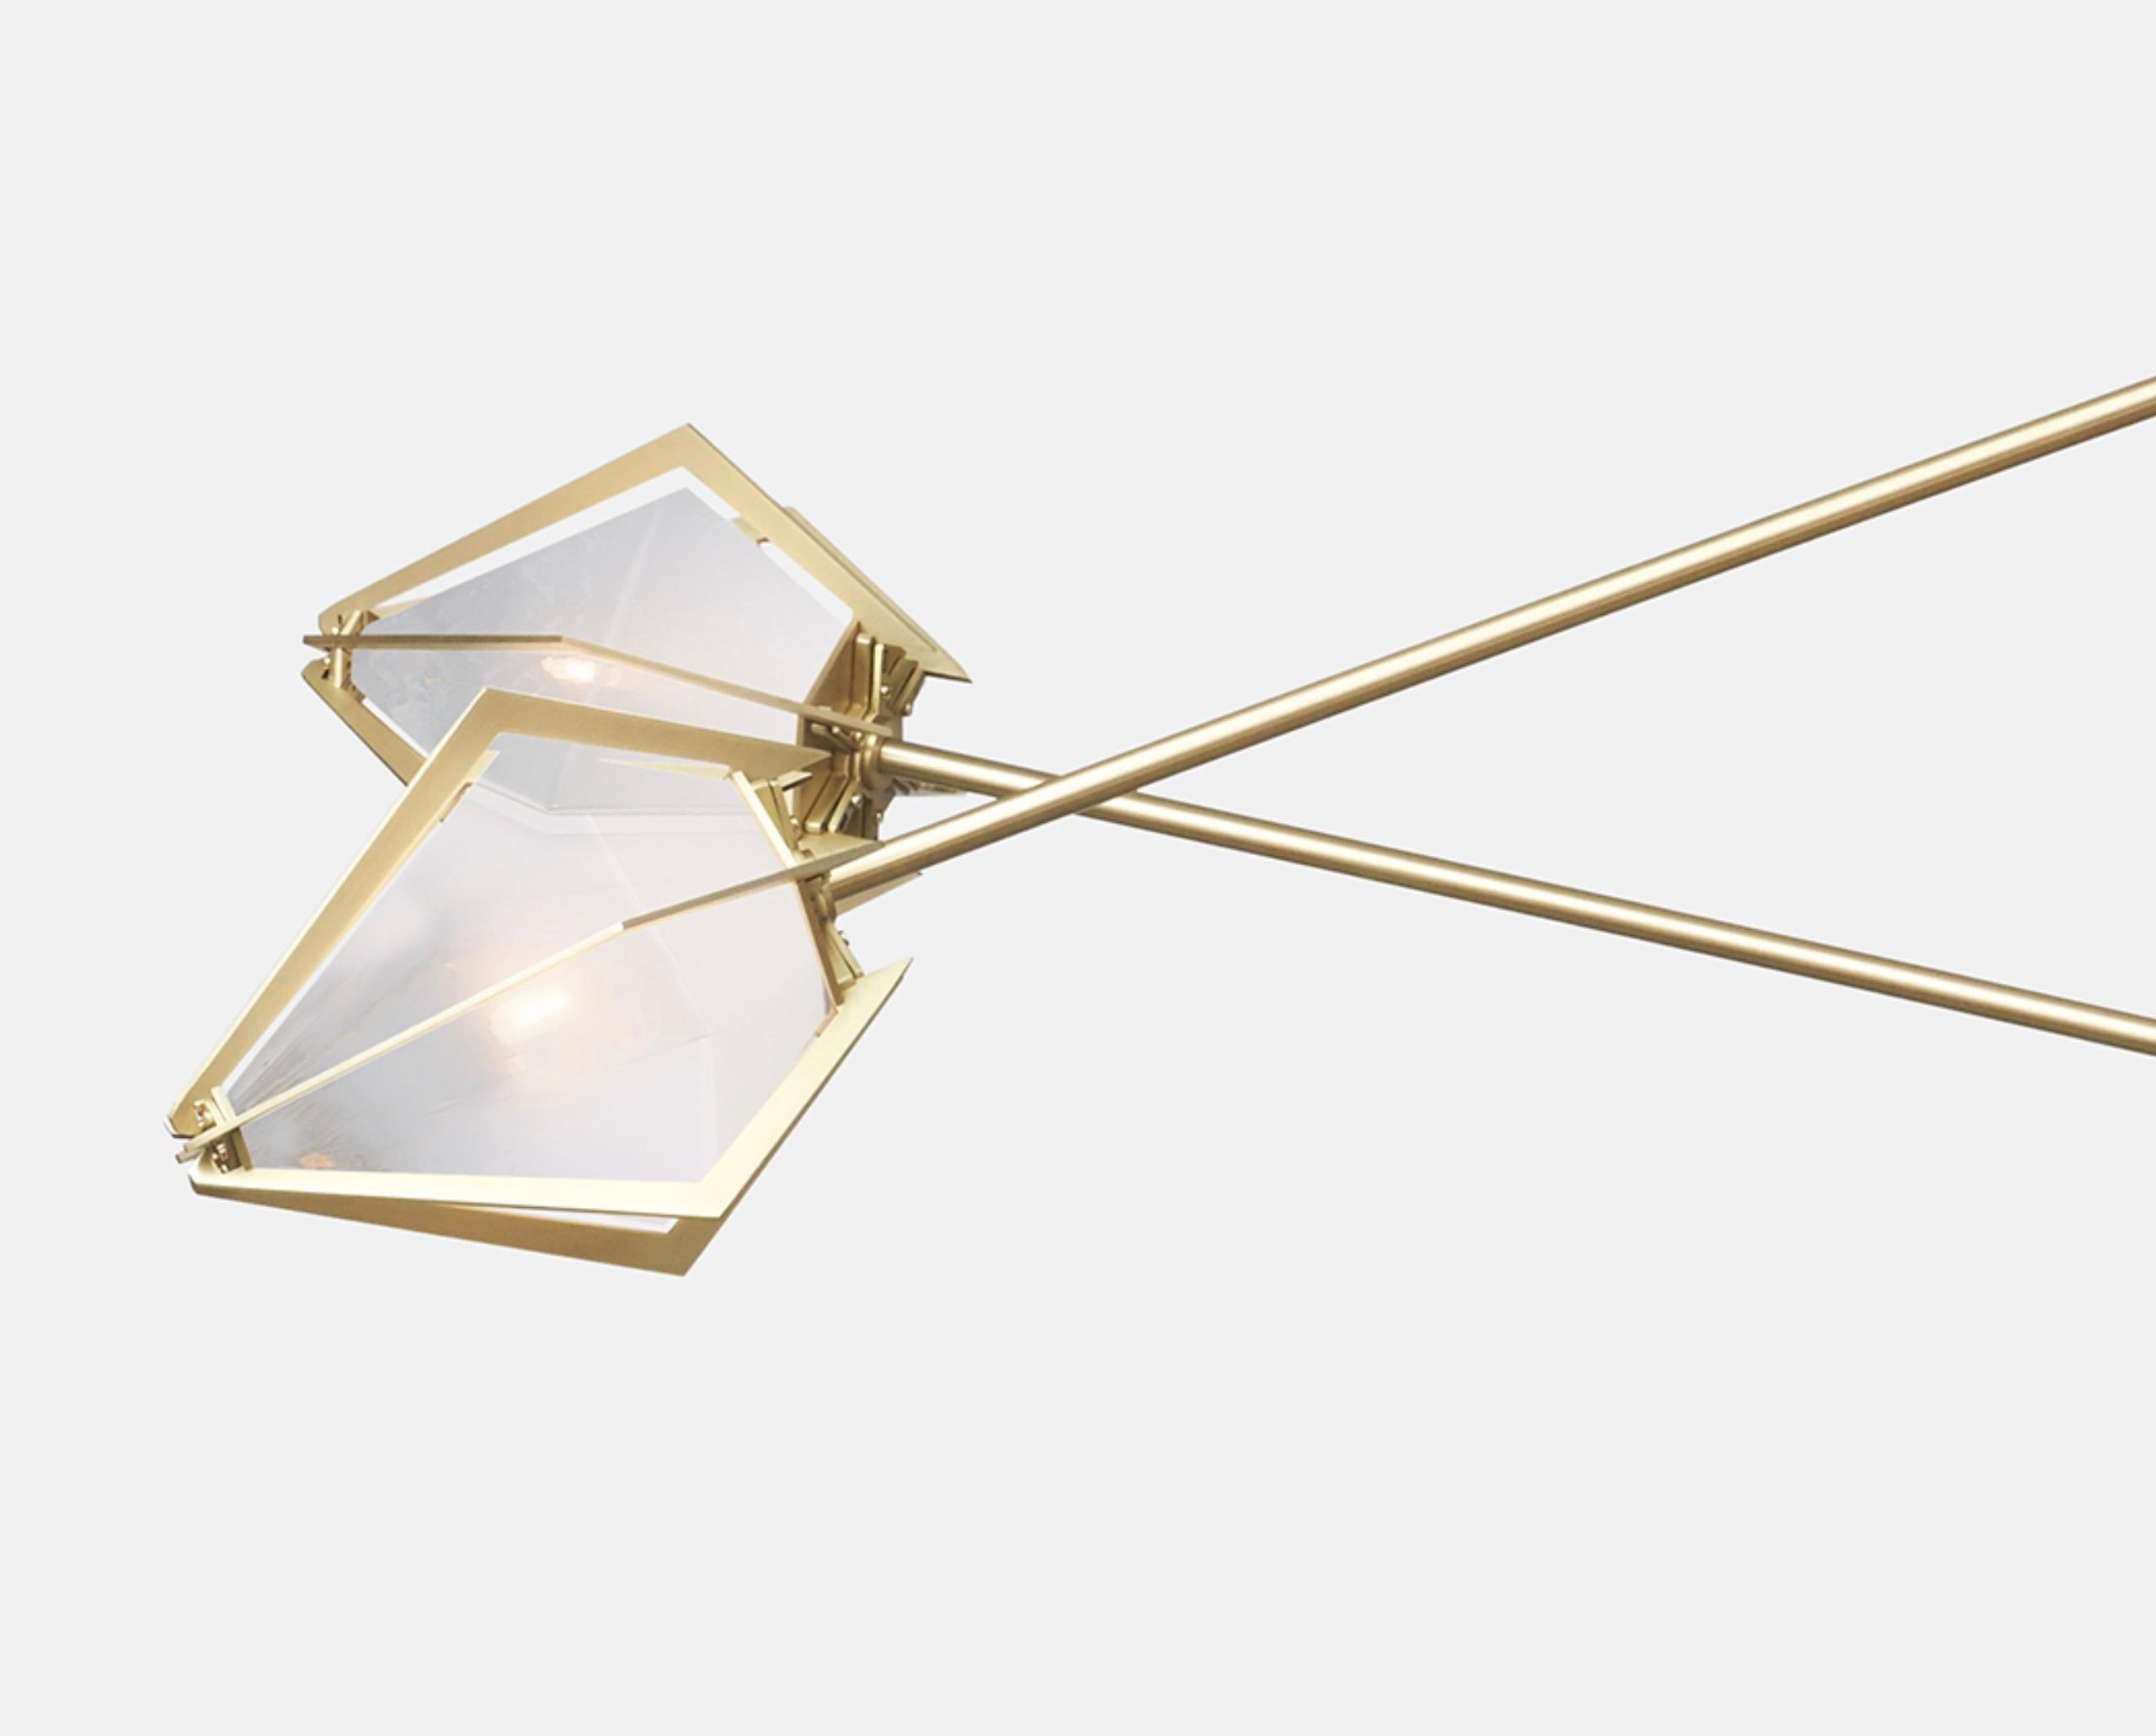 The Harlow Spoke Chandelier Large offers an elegant starburst of light that reflects and refracts through its mold-blown glass shade. A sparkling prism, the Harlow Spoke Chandelier Large is directly inspired by the world of jewelry with its metallic